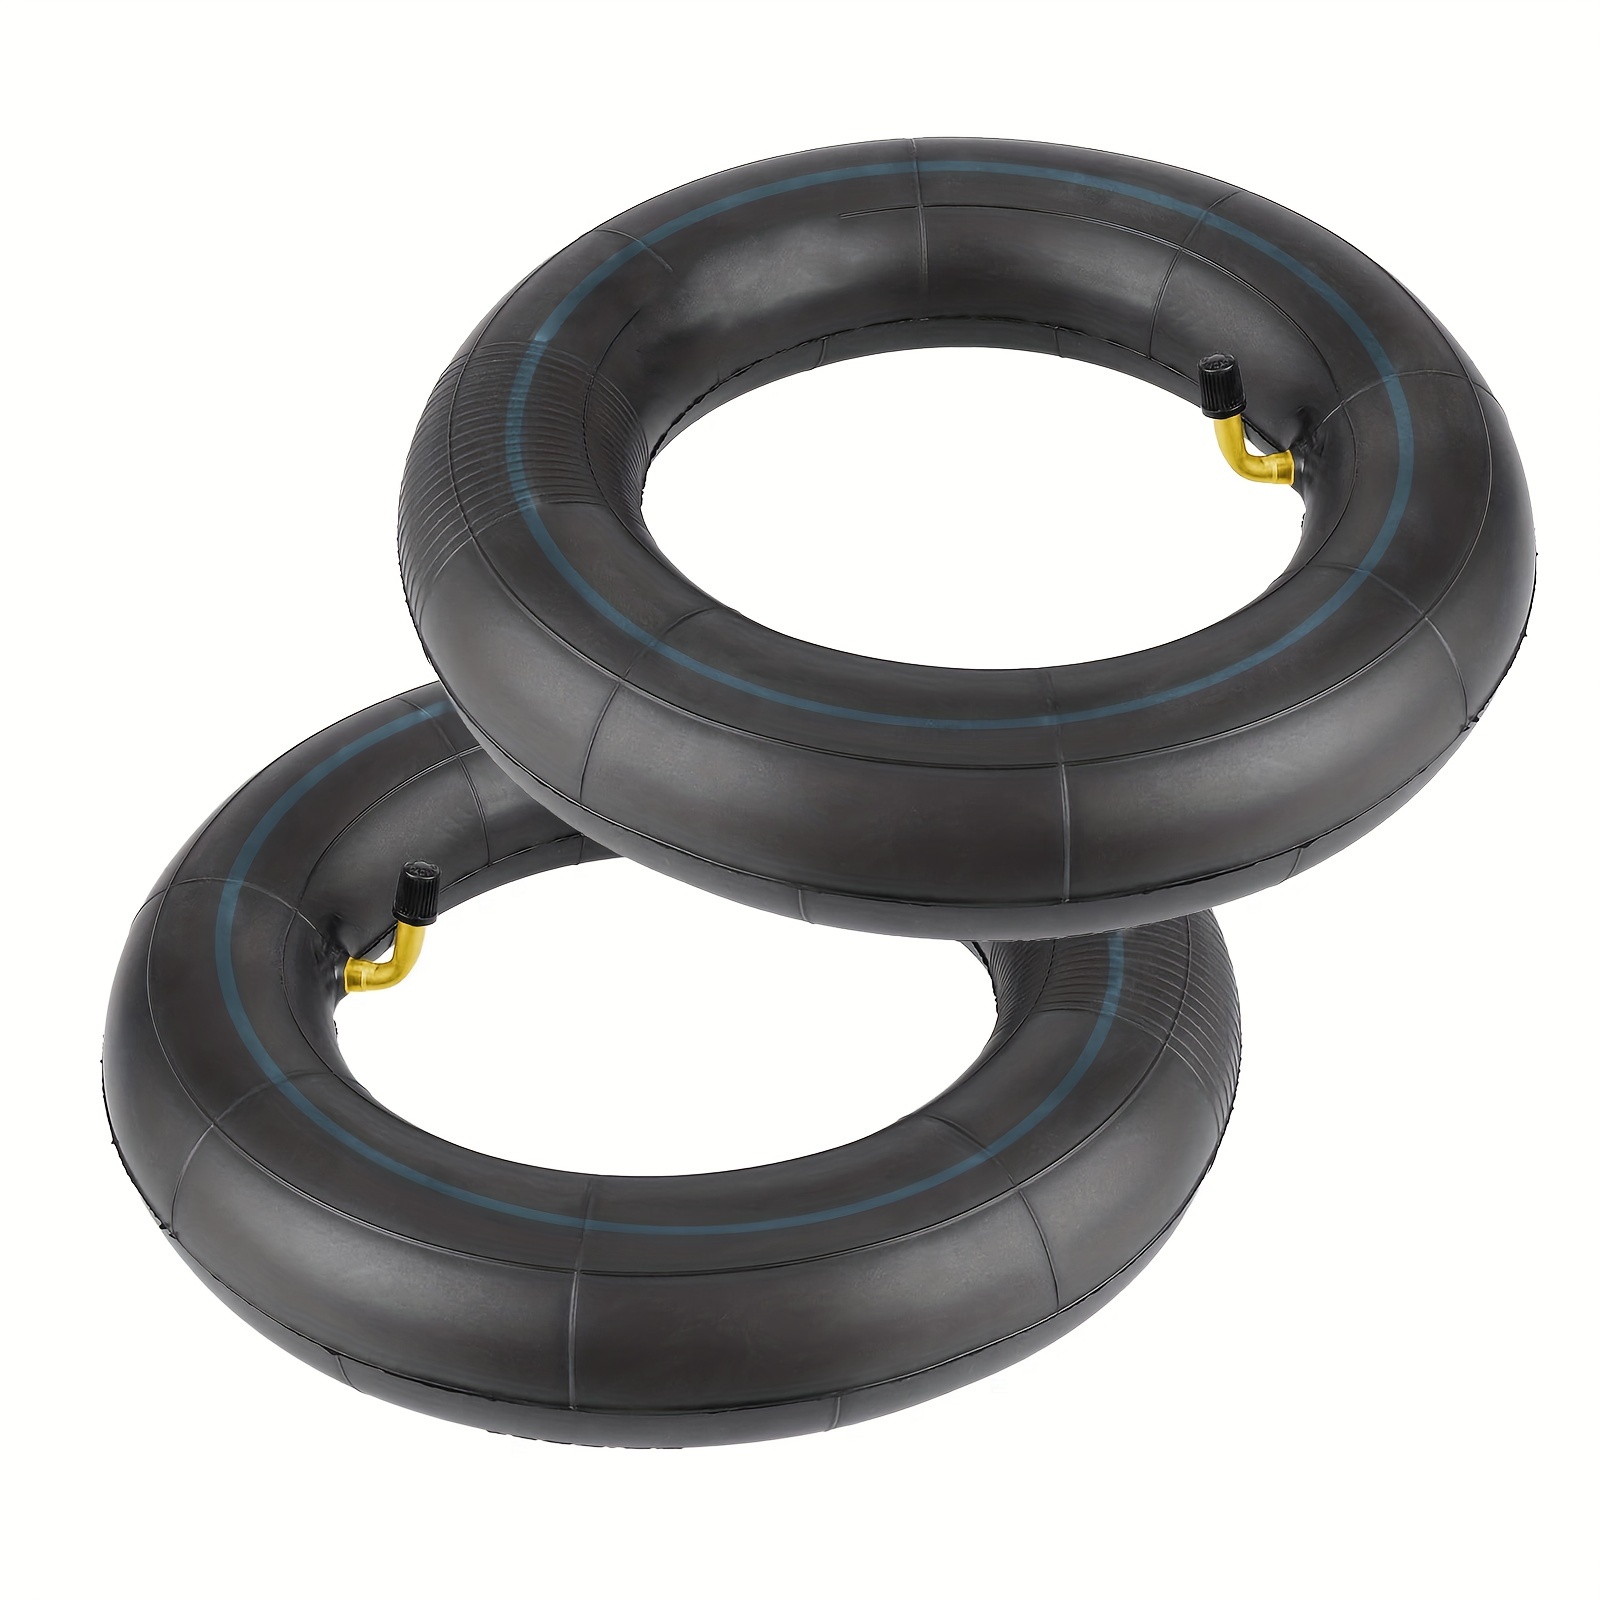 Shop Generic 10 inch Inner tube fits for 10x3.0 10x2.50 10x2.25